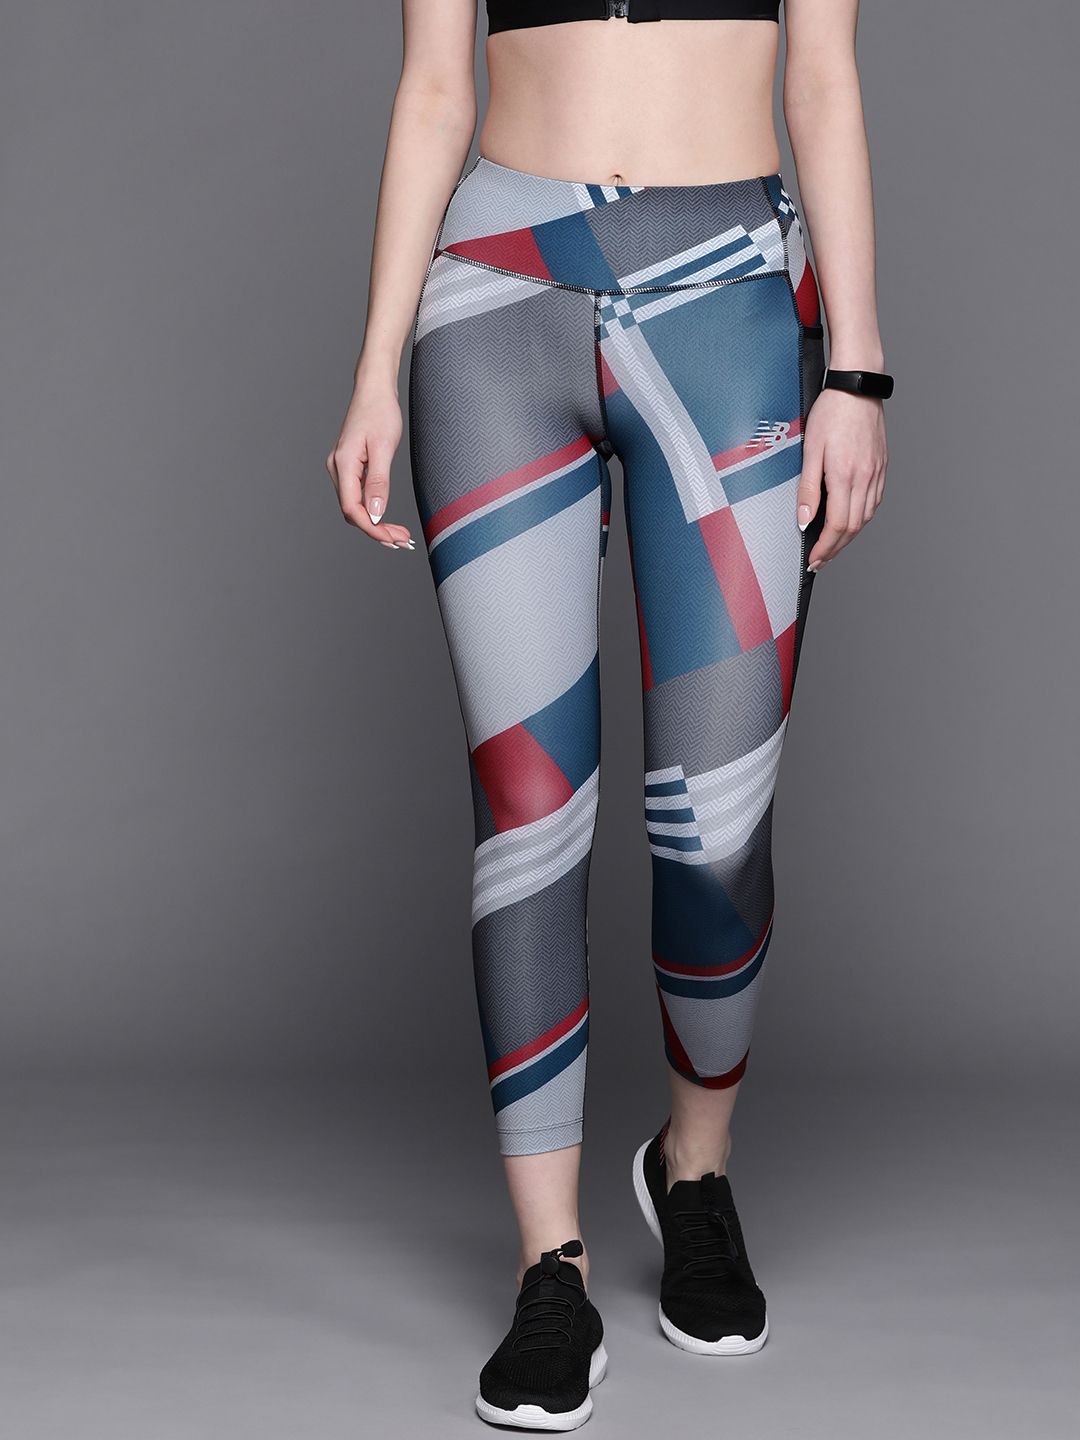 New Balance Women Black & Blue Printed Running Tights Price in India